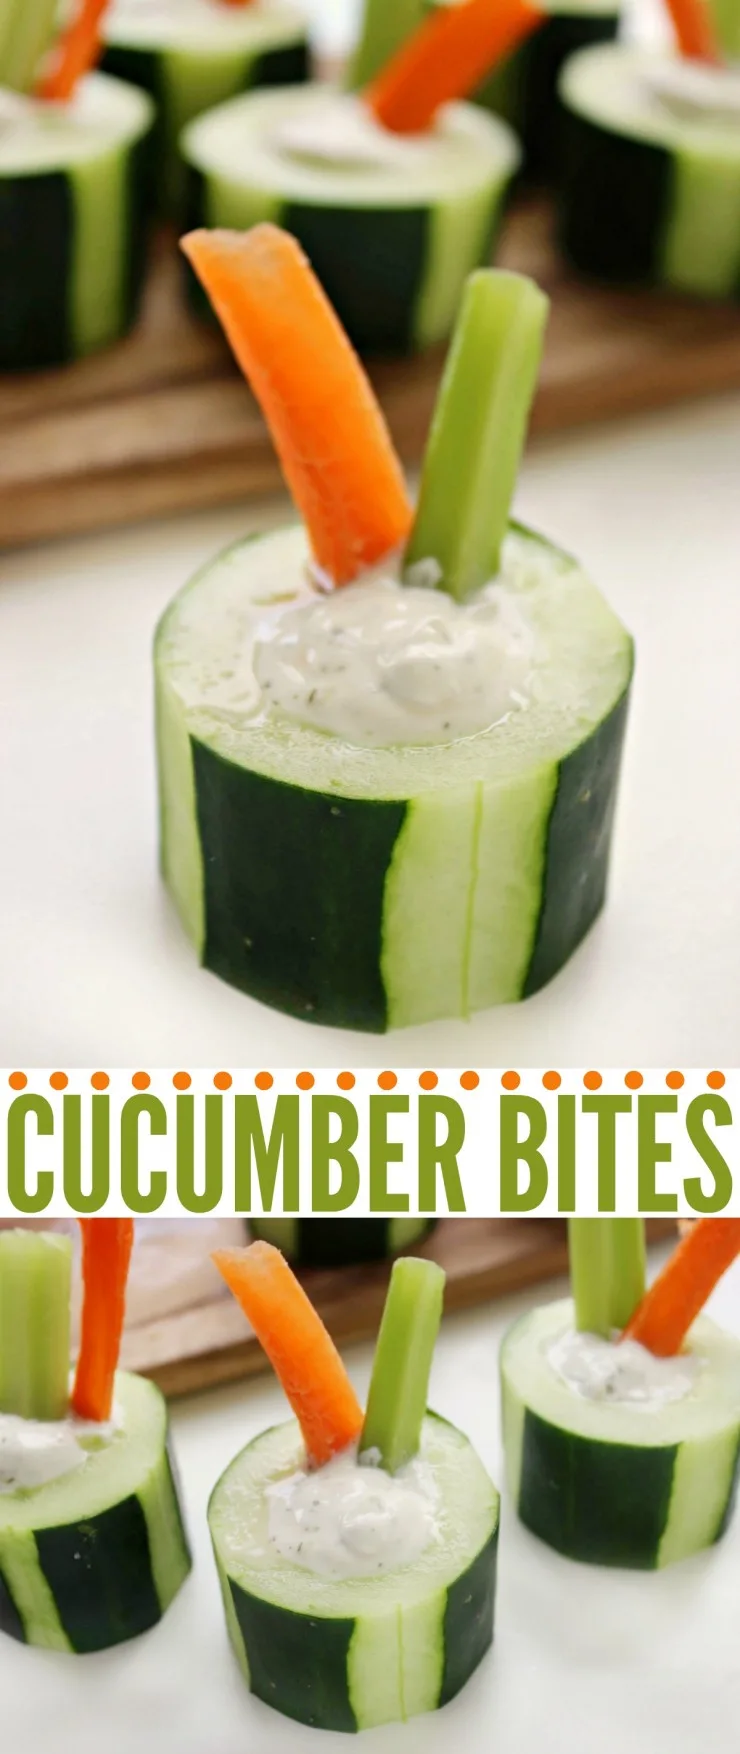 These Cucumber Bites are a fresh appetizer perfect for serving at parties. It's a fun twist on veggies and dip that everyone will love.